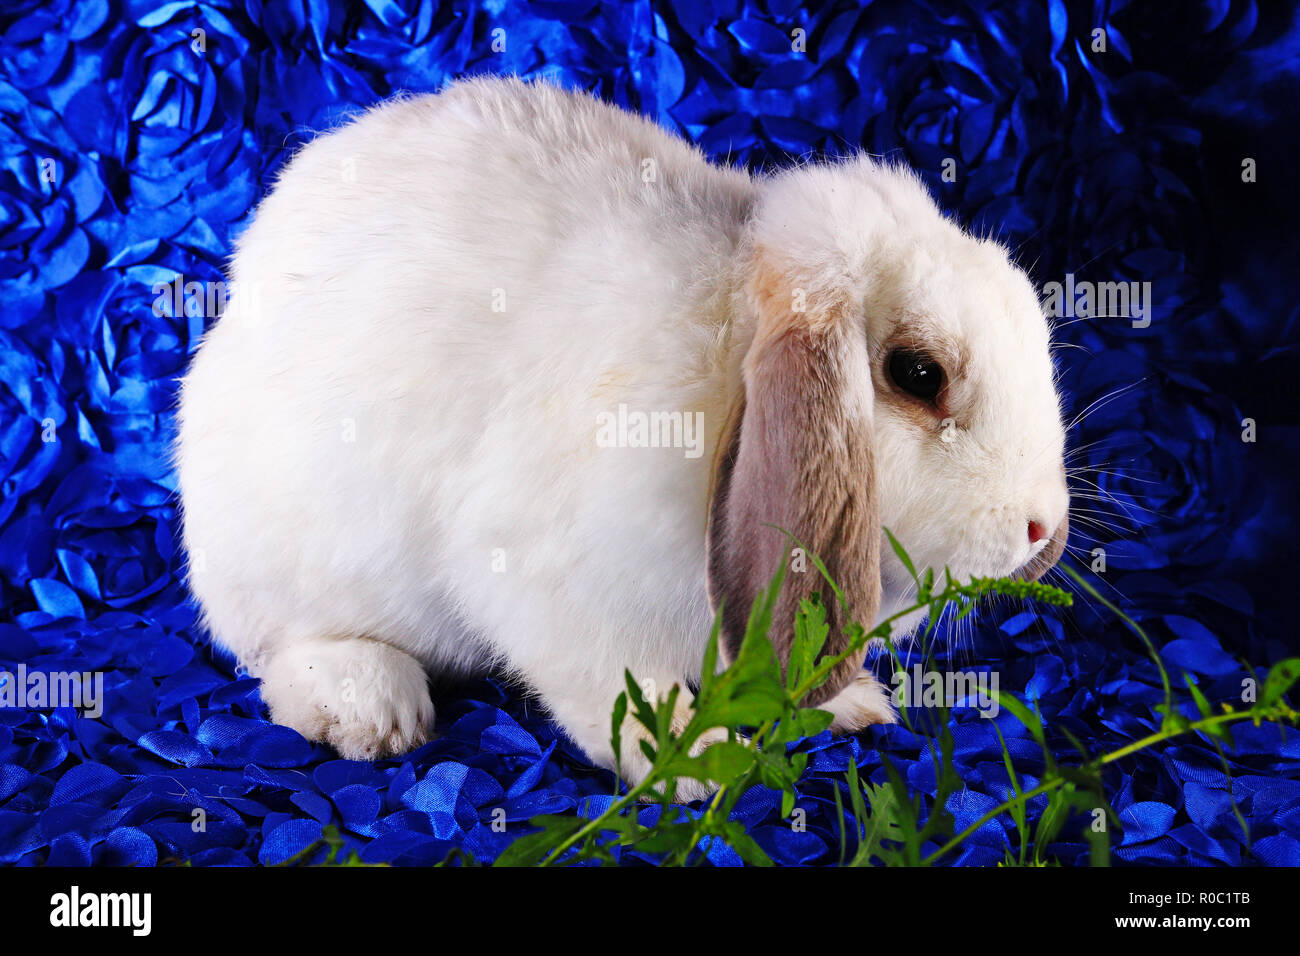 Cute little young bunny rabbit lop eared dwarf rabbits Stock Photo